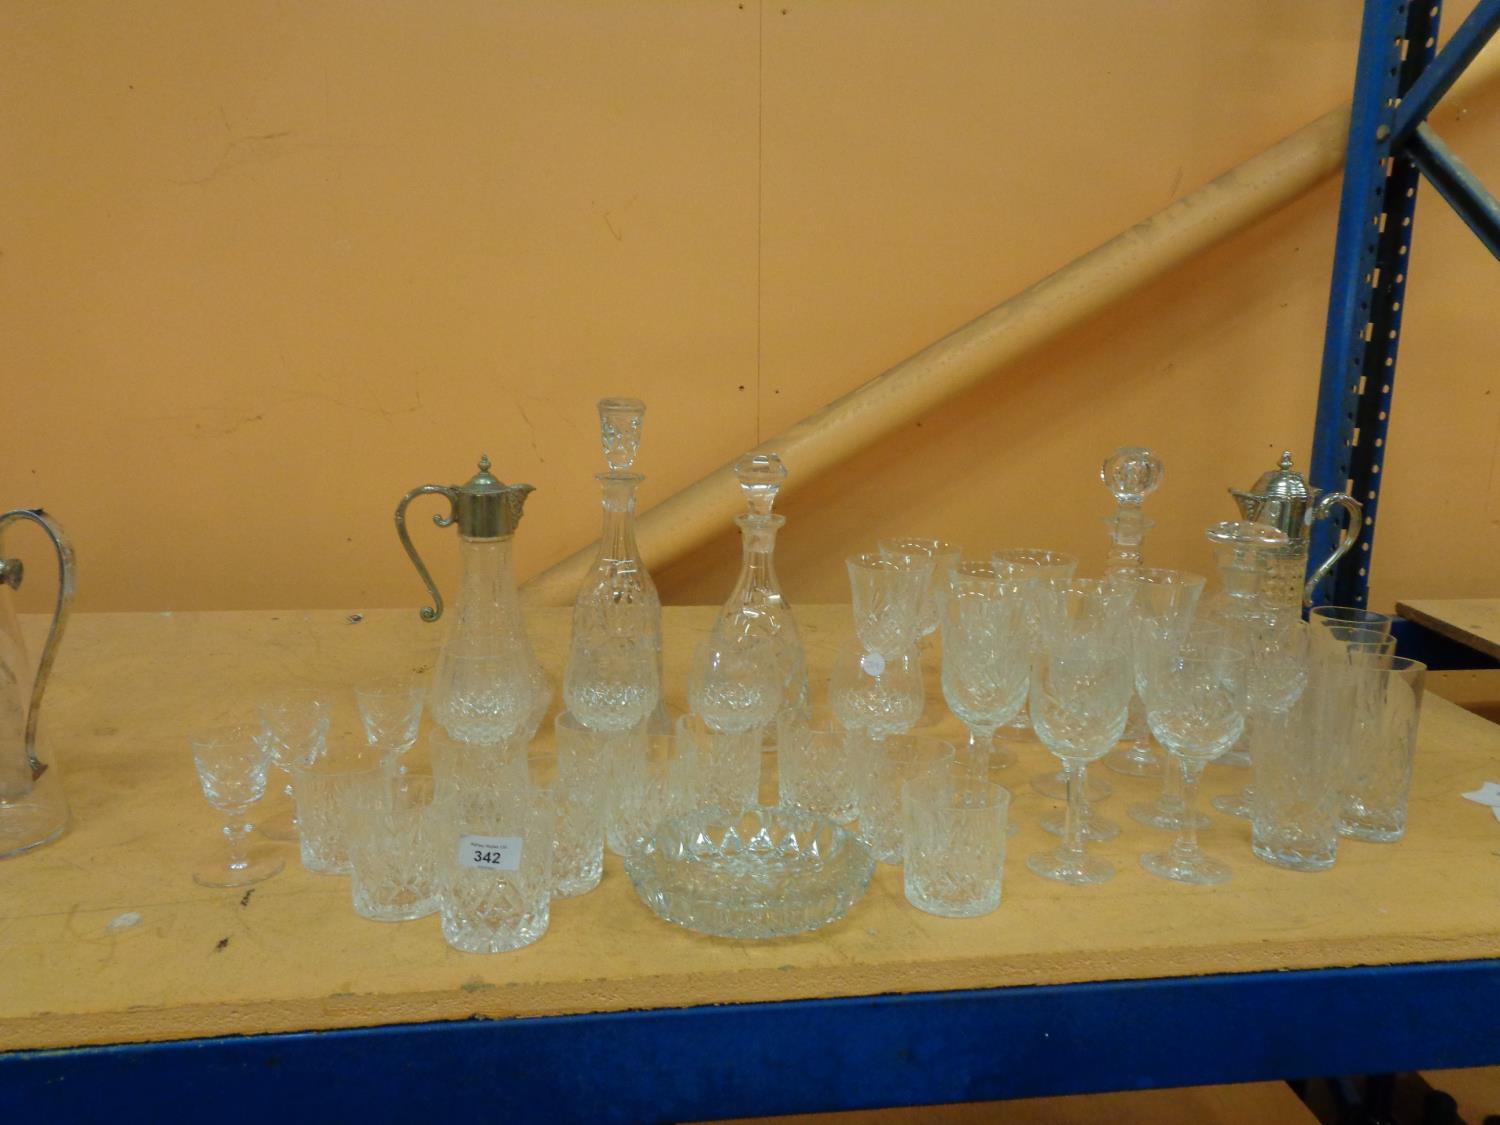 A LARGE COLLECTION OF GLASSWARE INCLUDING DECANTERS AND A VARIETY OF DRINKS GLASSES - Bild 2 aus 8